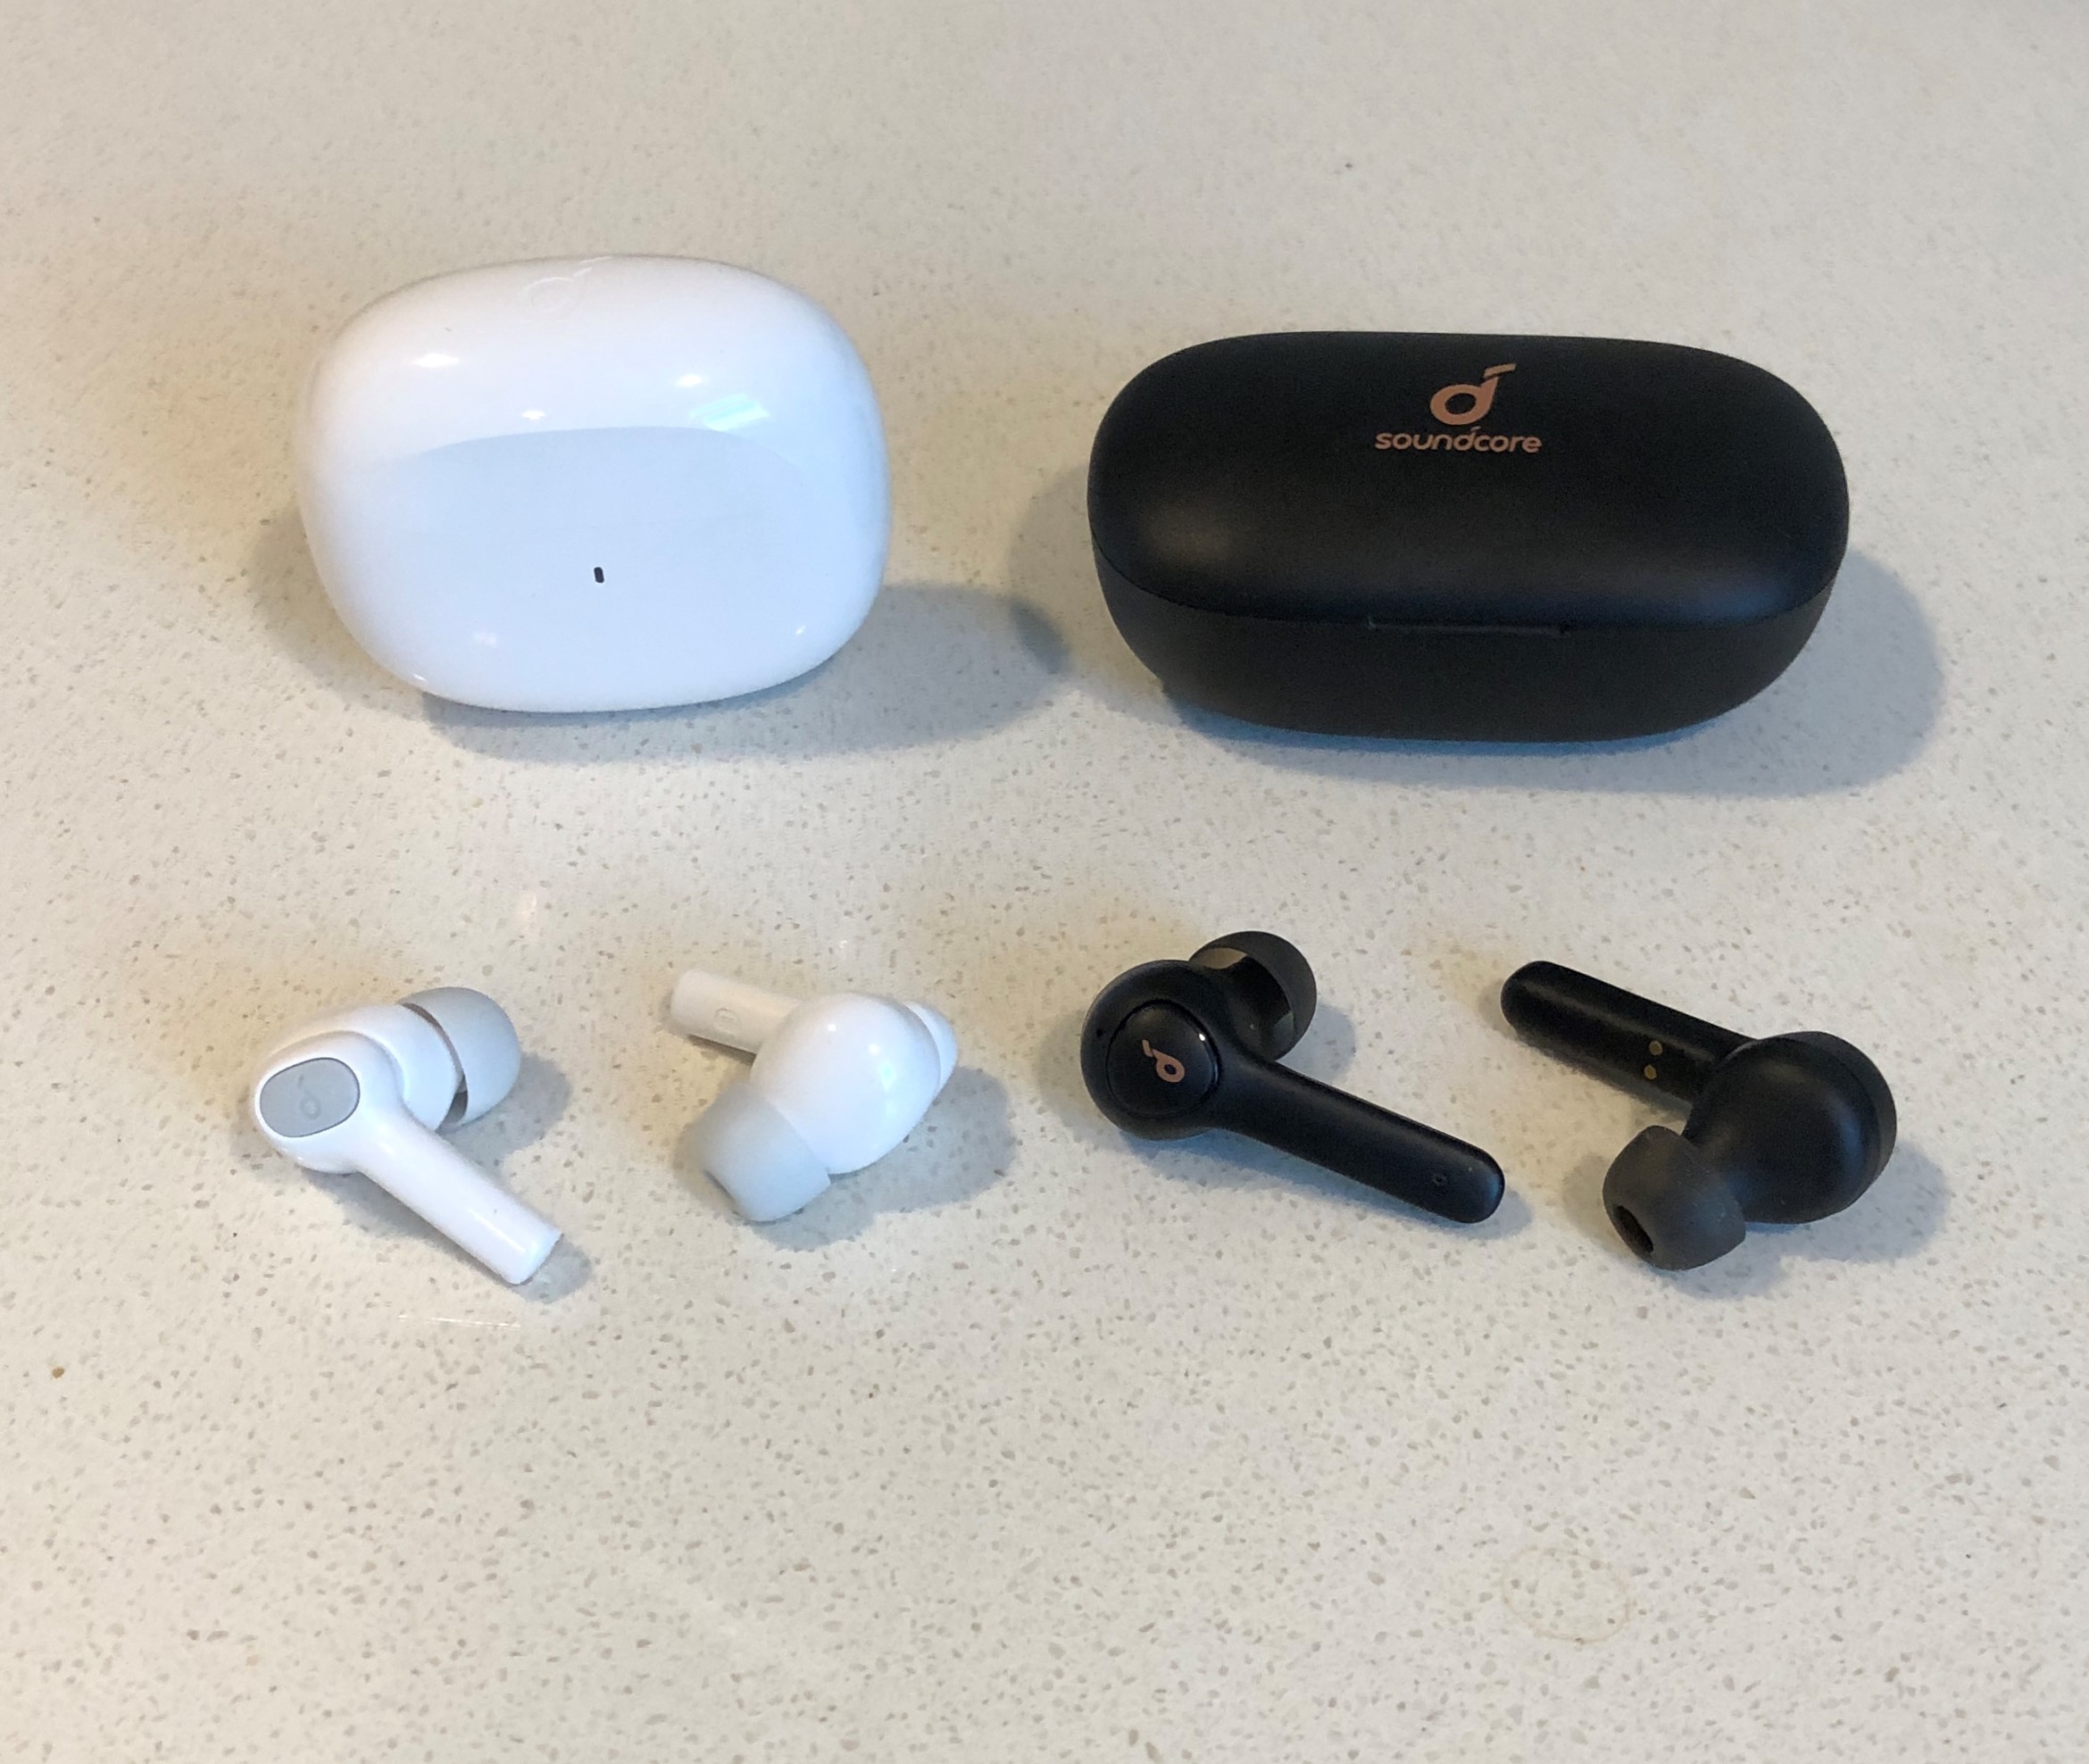 Soundcore Life P2i vs P2 charging case and wireless earbuds